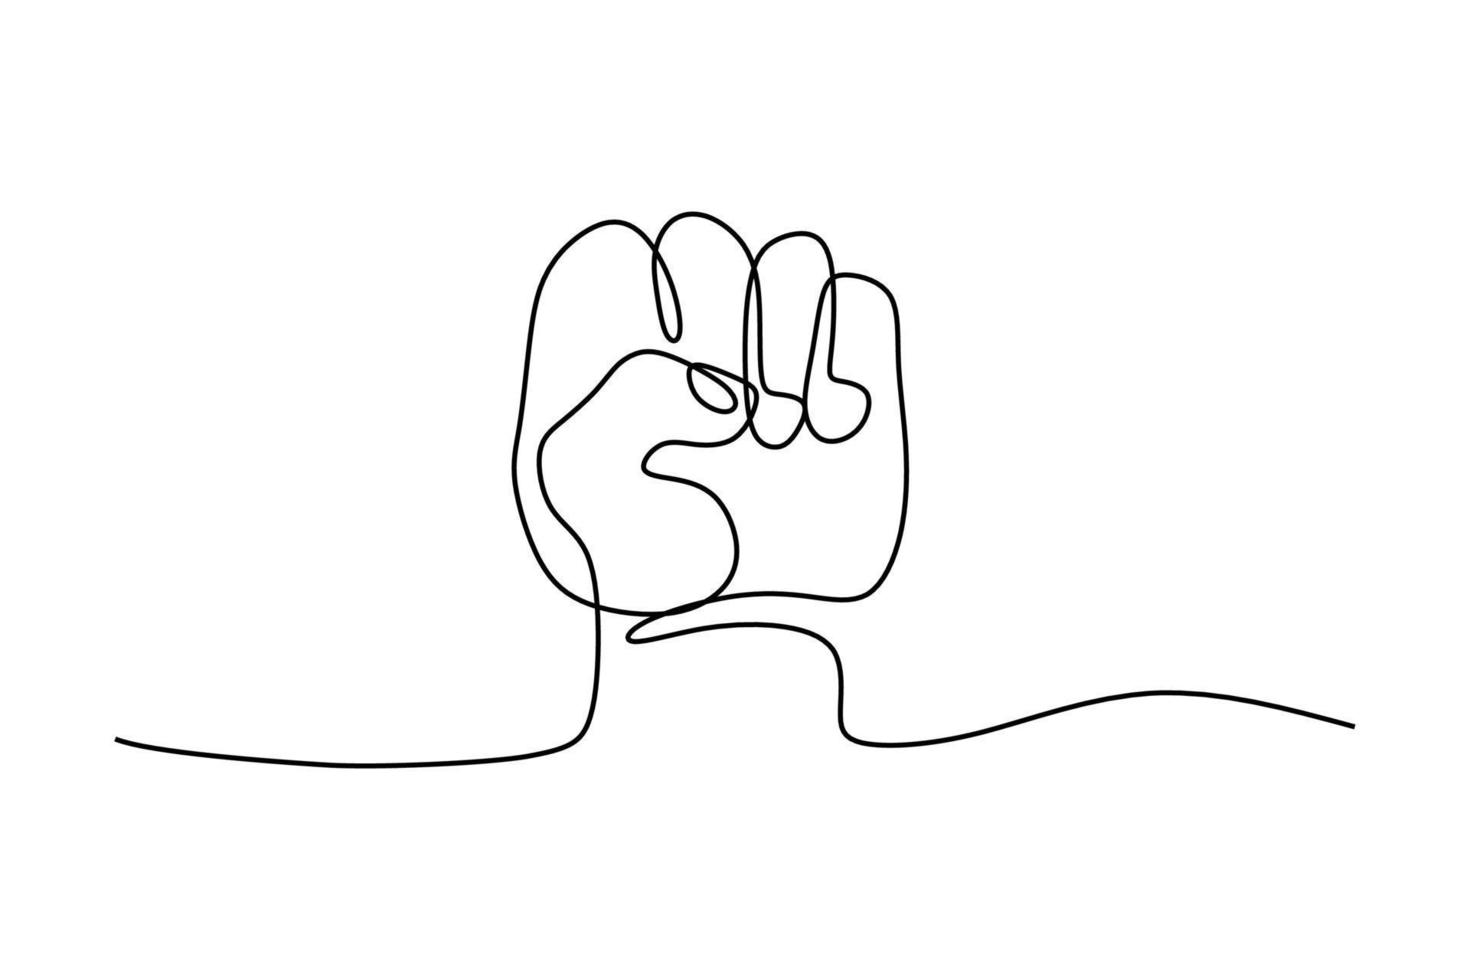 Hand punch gesture oneline continuous editable line art vector